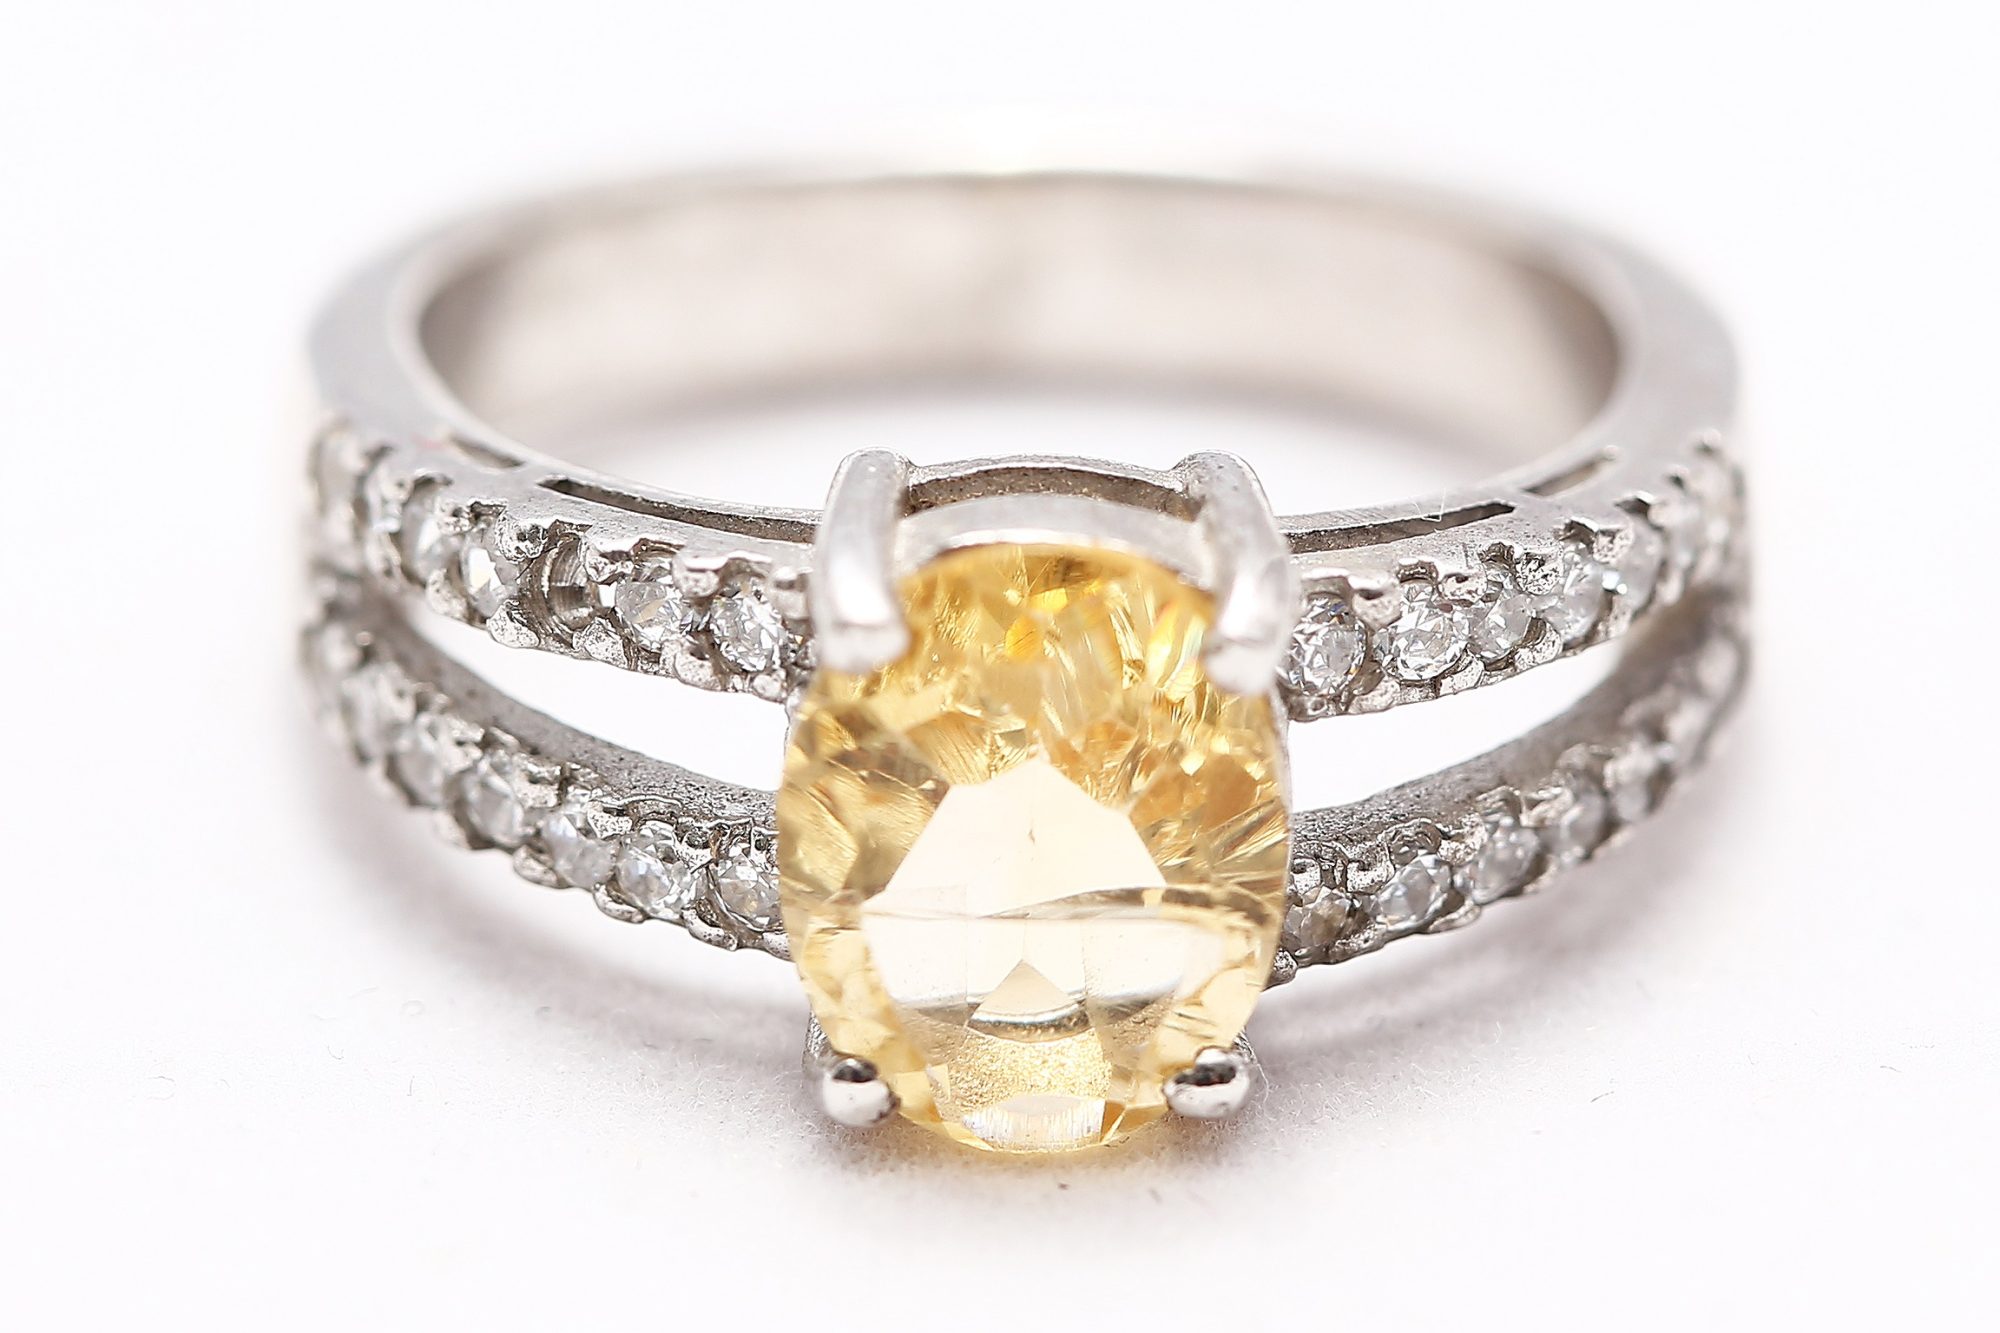 A white gold citrine ring with a diamond pavé setting